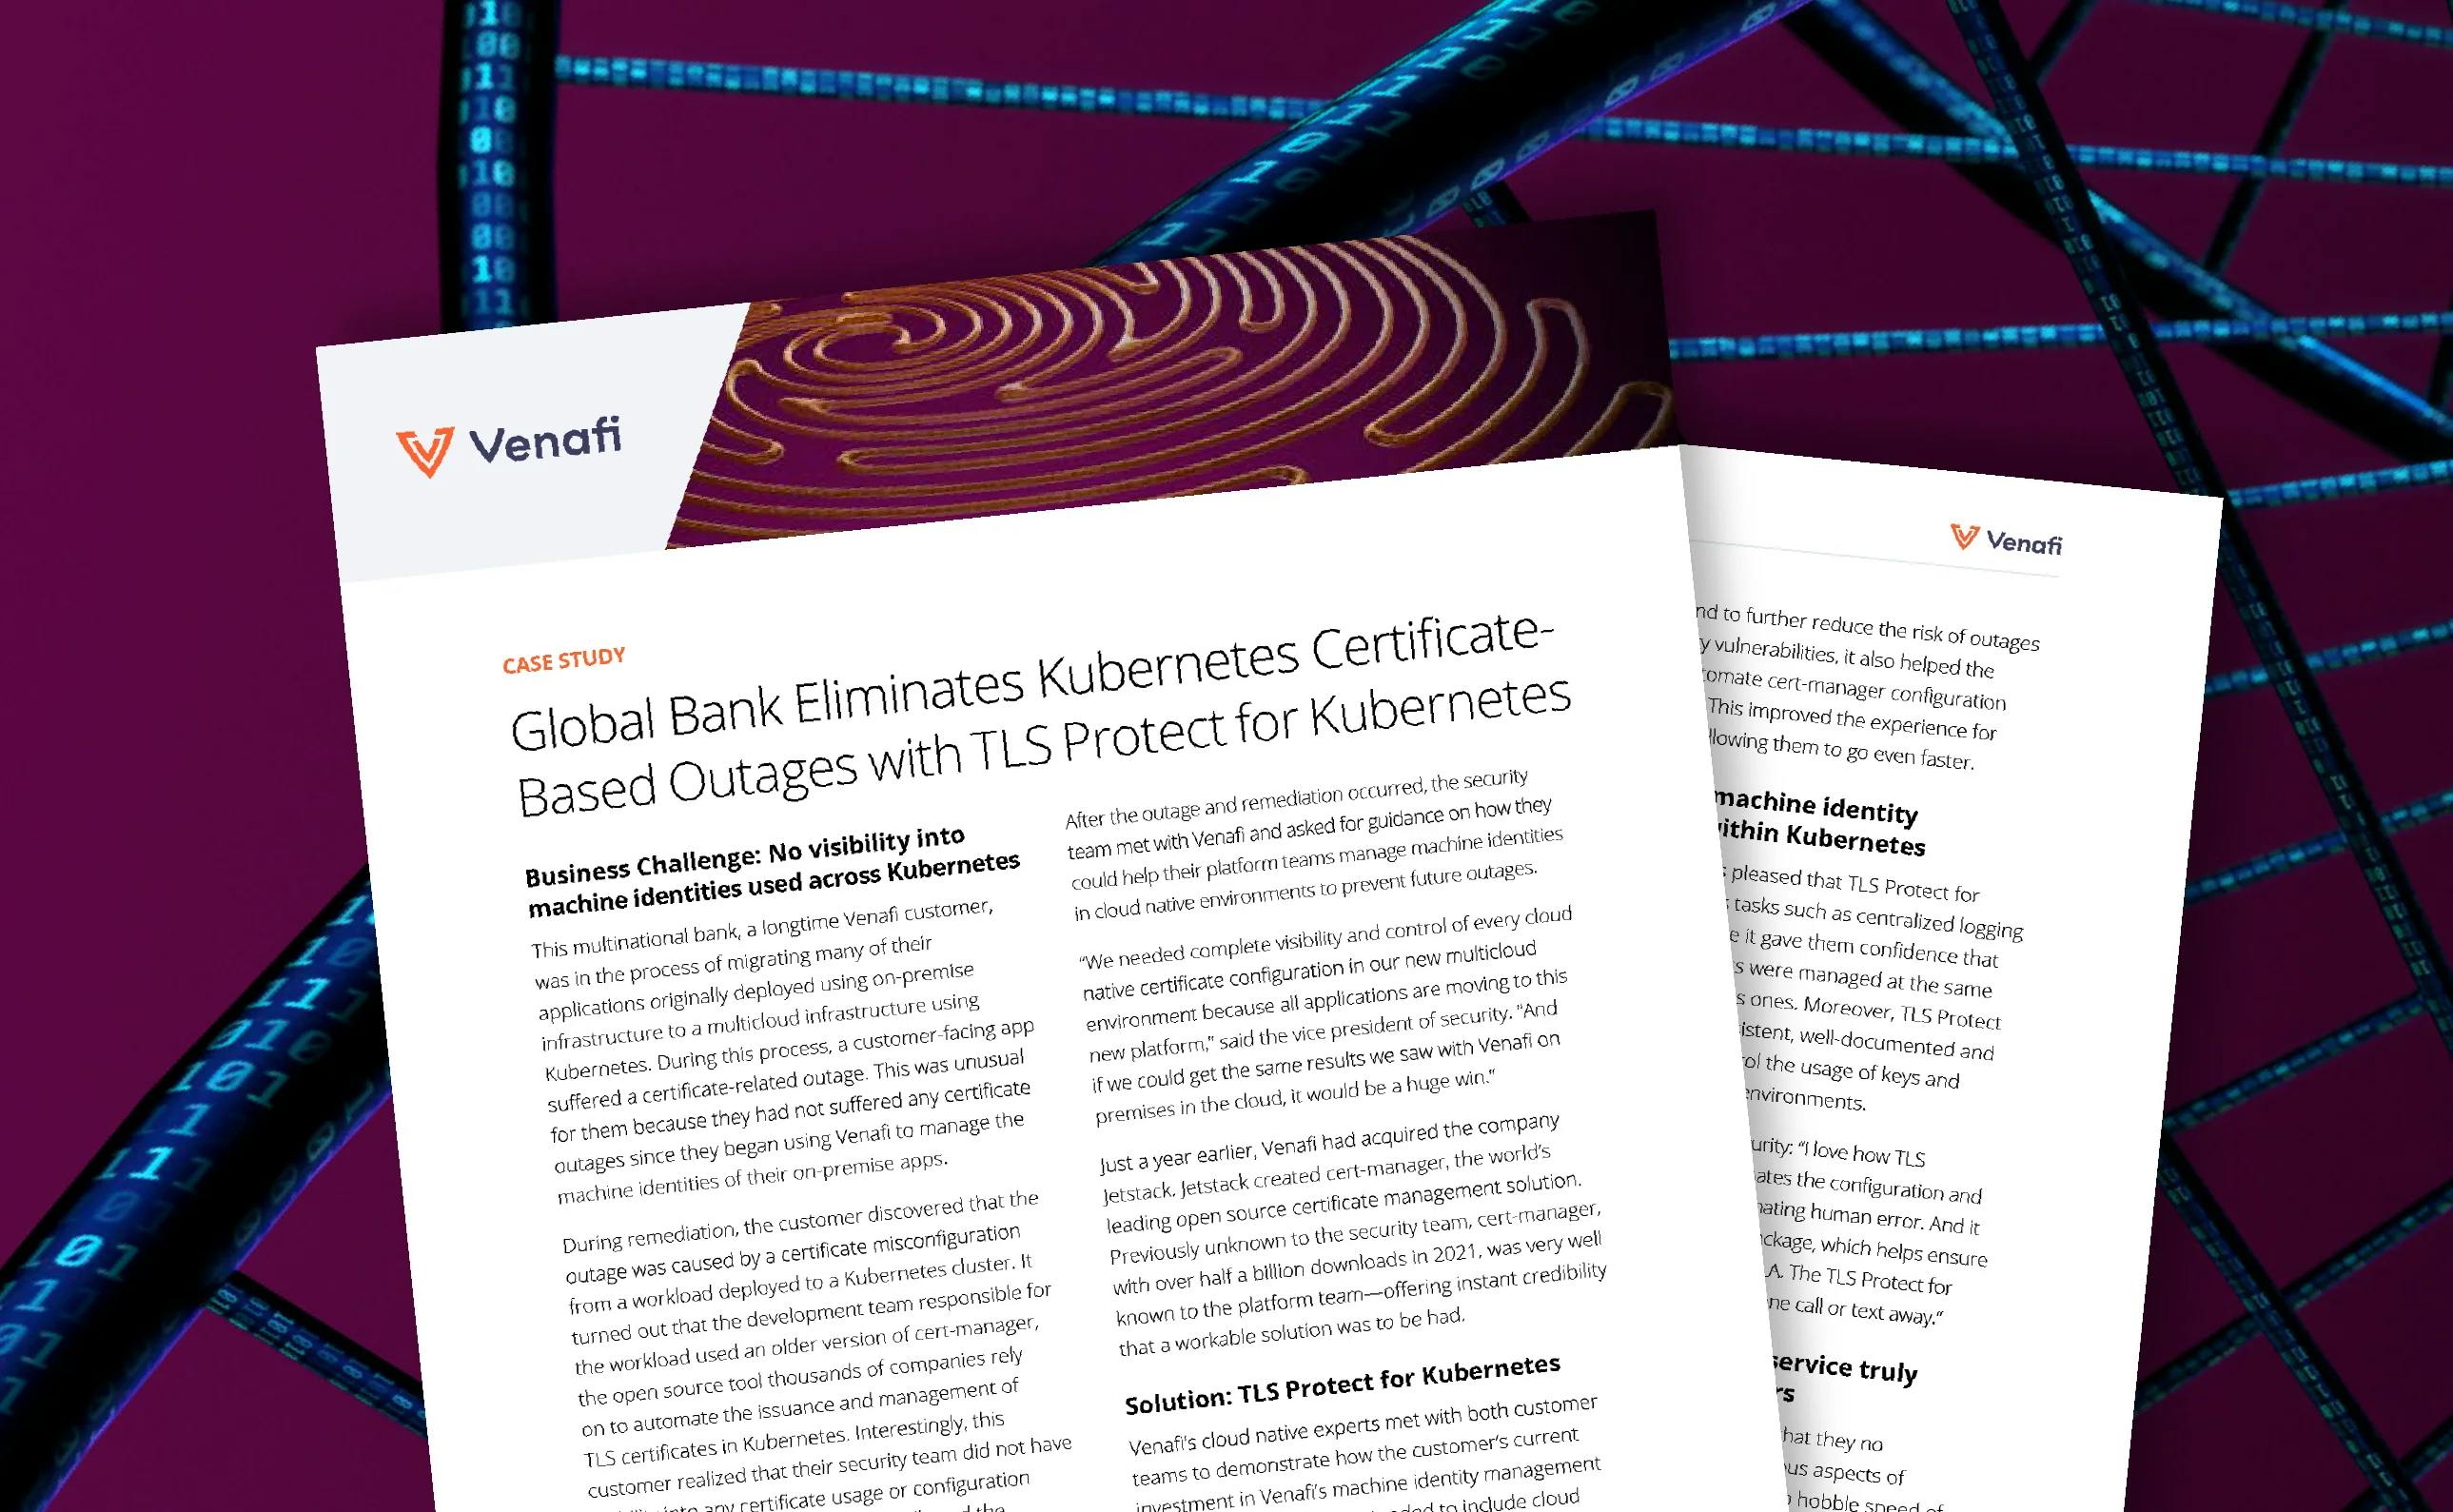 Global Bank Eliminates Kubernetes Certificate-Based Outages with TLS Protect for Kubernetes - cover photo